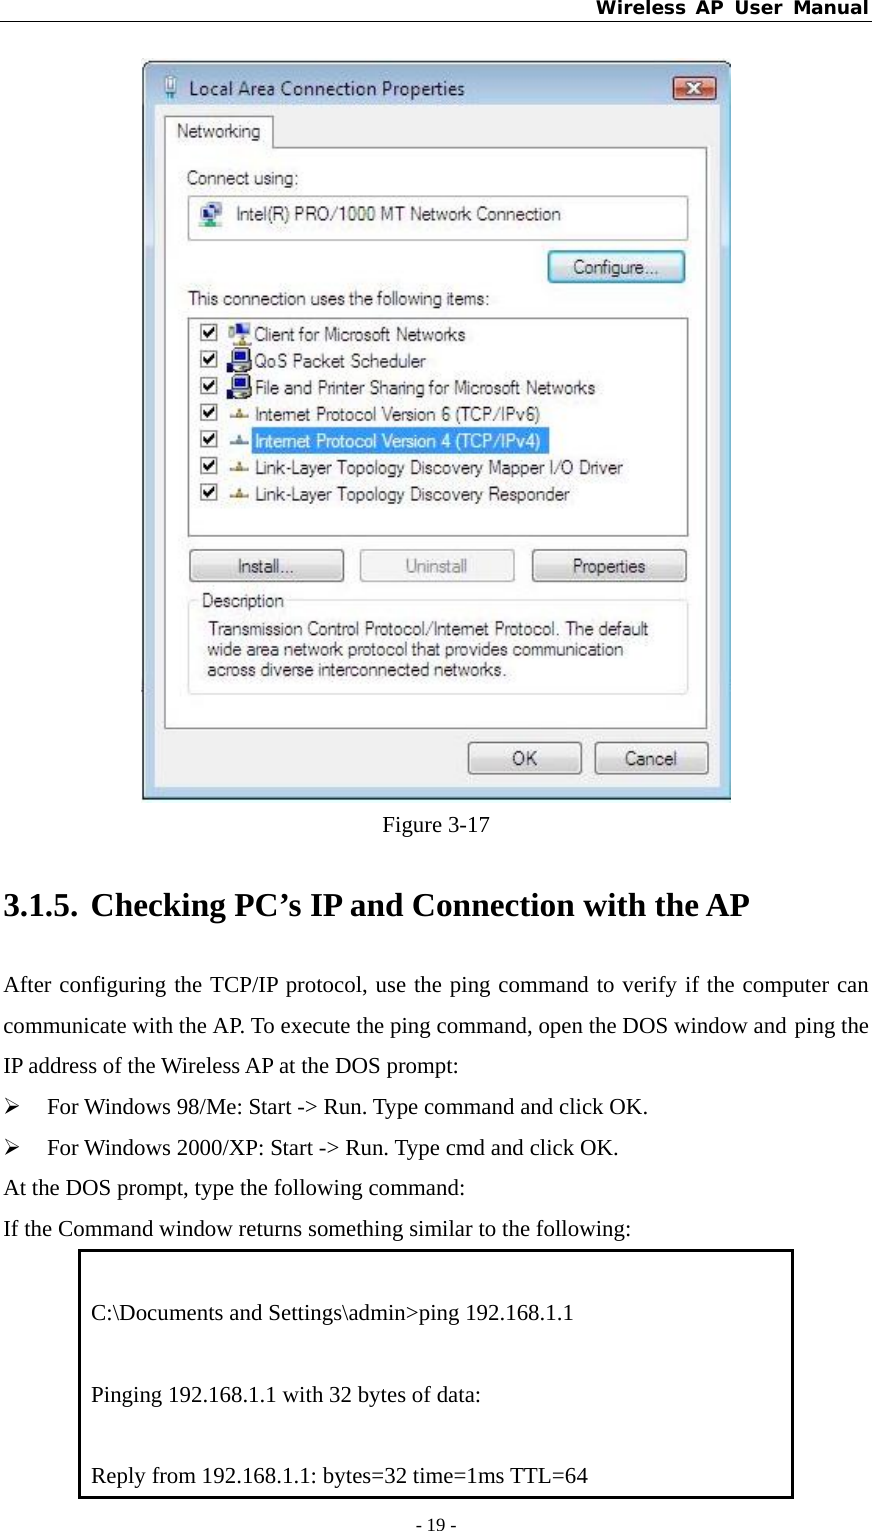 Wireless AP User Manual - 19 -   Figure 3-17 3.1.5. Checking PC’s IP and Connection with the AP After configuring the TCP/IP protocol, use the ping command to verify if the computer can communicate with the AP. To execute the ping command, open the DOS window and ping the IP address of the Wireless AP at the DOS prompt: ¾ For Windows 98/Me: Start -&gt; Run. Type command and click OK. ¾ For Windows 2000/XP: Start -&gt; Run. Type cmd and click OK. At the DOS prompt, type the following command: If the Command window returns something similar to the following:  C:\Documents and Settings\admin&gt;ping 192.168.1.1  Pinging 192.168.1.1 with 32 bytes of data:  Reply from 192.168.1.1: bytes=32 time=1ms TTL=64 